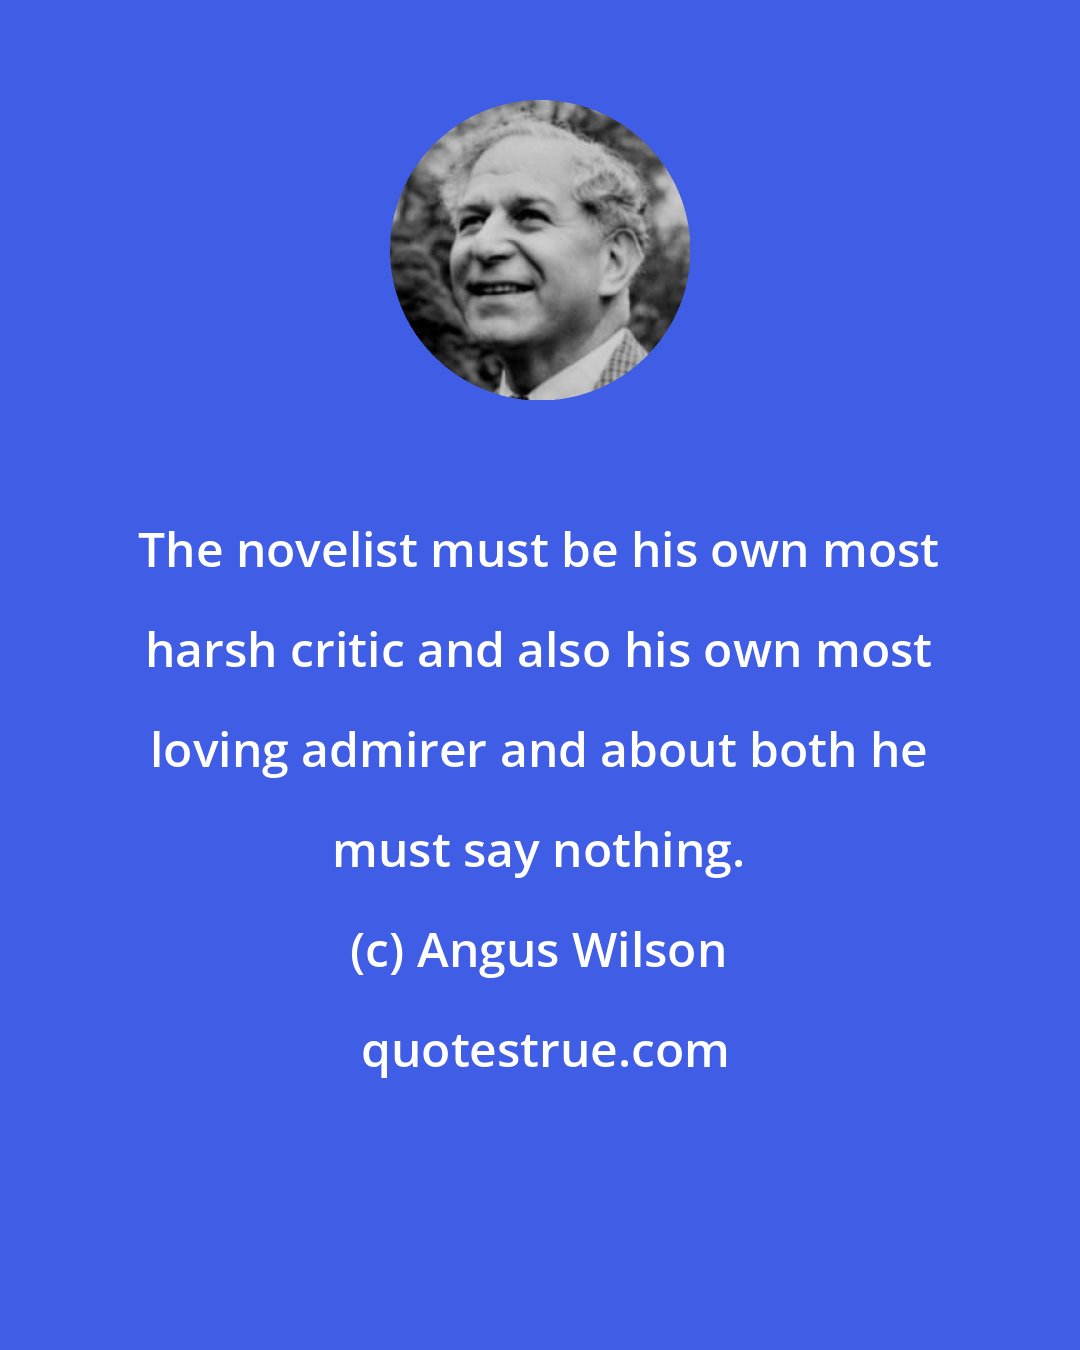 Angus Wilson: The novelist must be his own most harsh critic and also his own most loving admirer and about both he must say nothing.